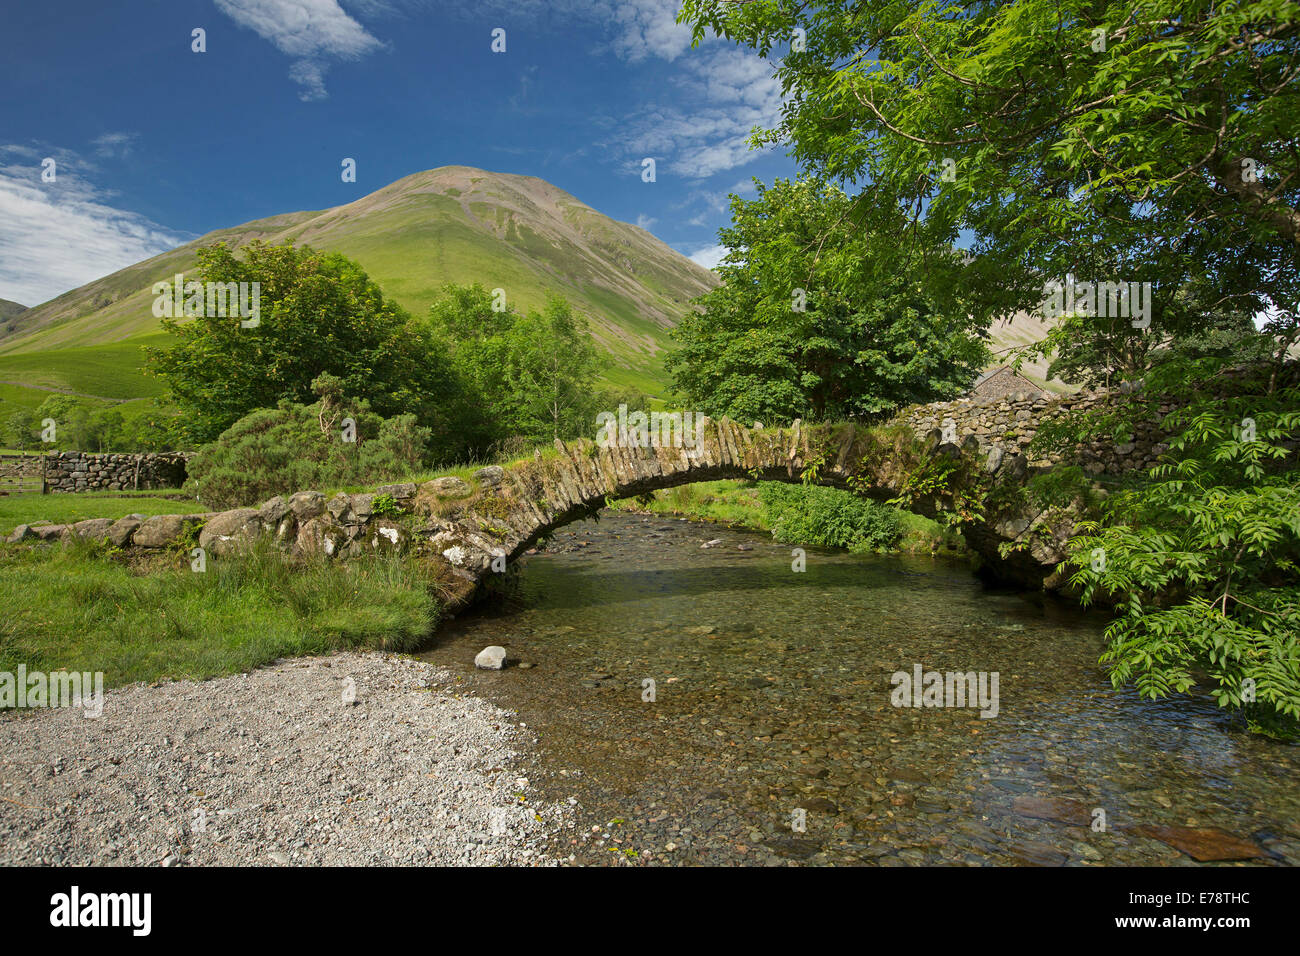 Landscape with high mountain peak, blue sky, arched stone pedestrian bridge over clear shallow stream at Wasdale Head, Lake District Cumbria England Stock Photo